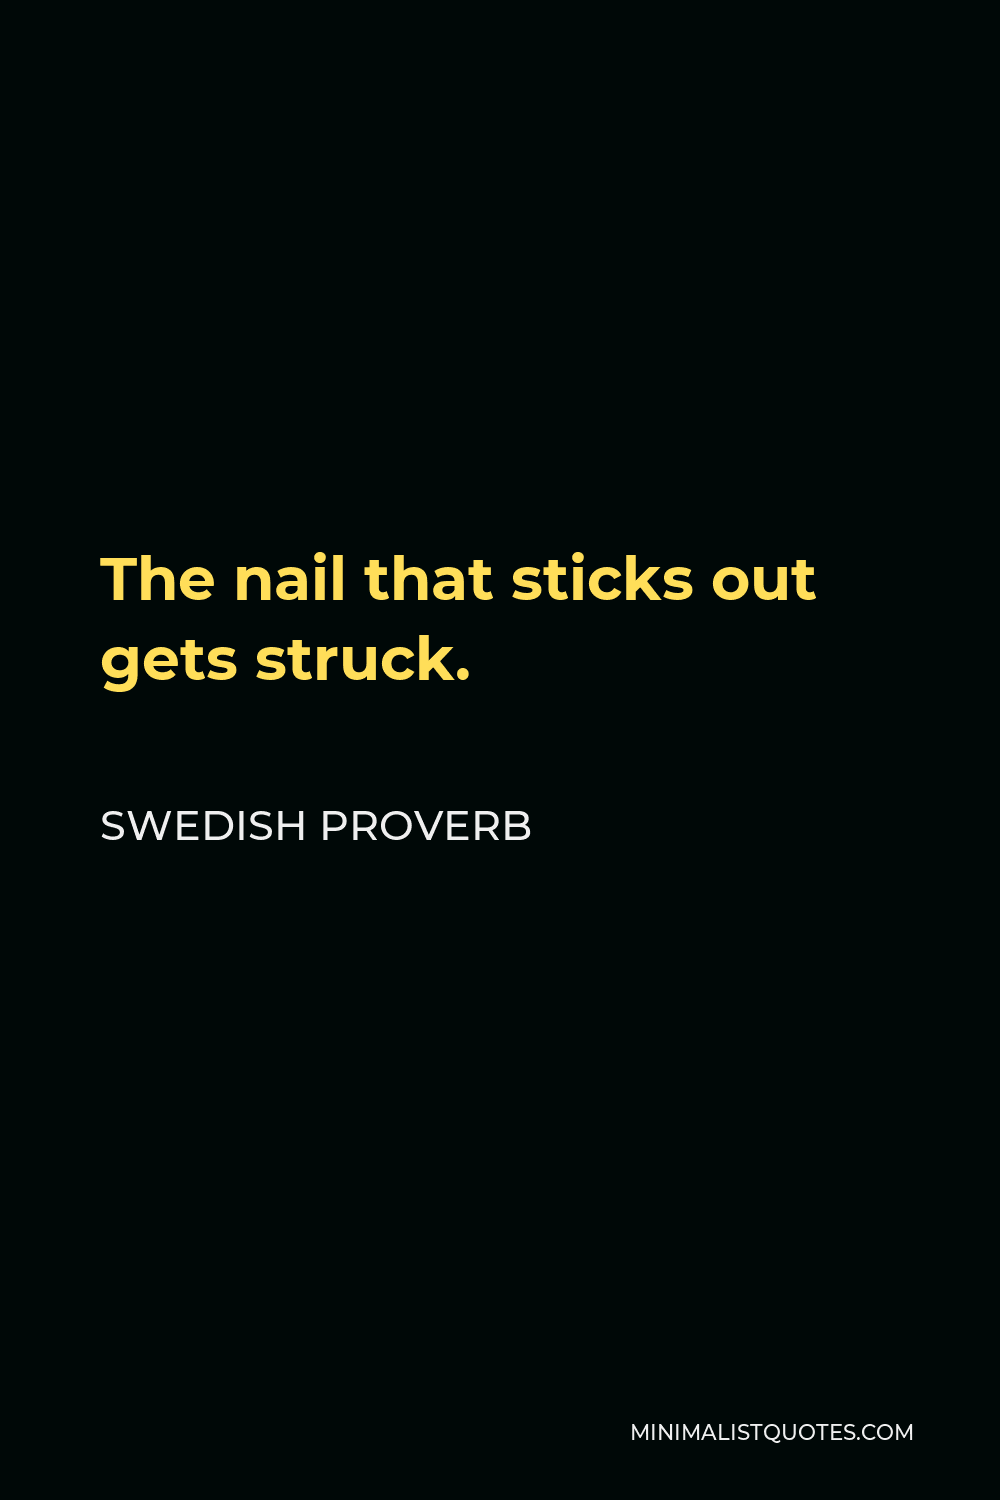 Swedish Proverb Quote - The nail that sticks out gets struck.